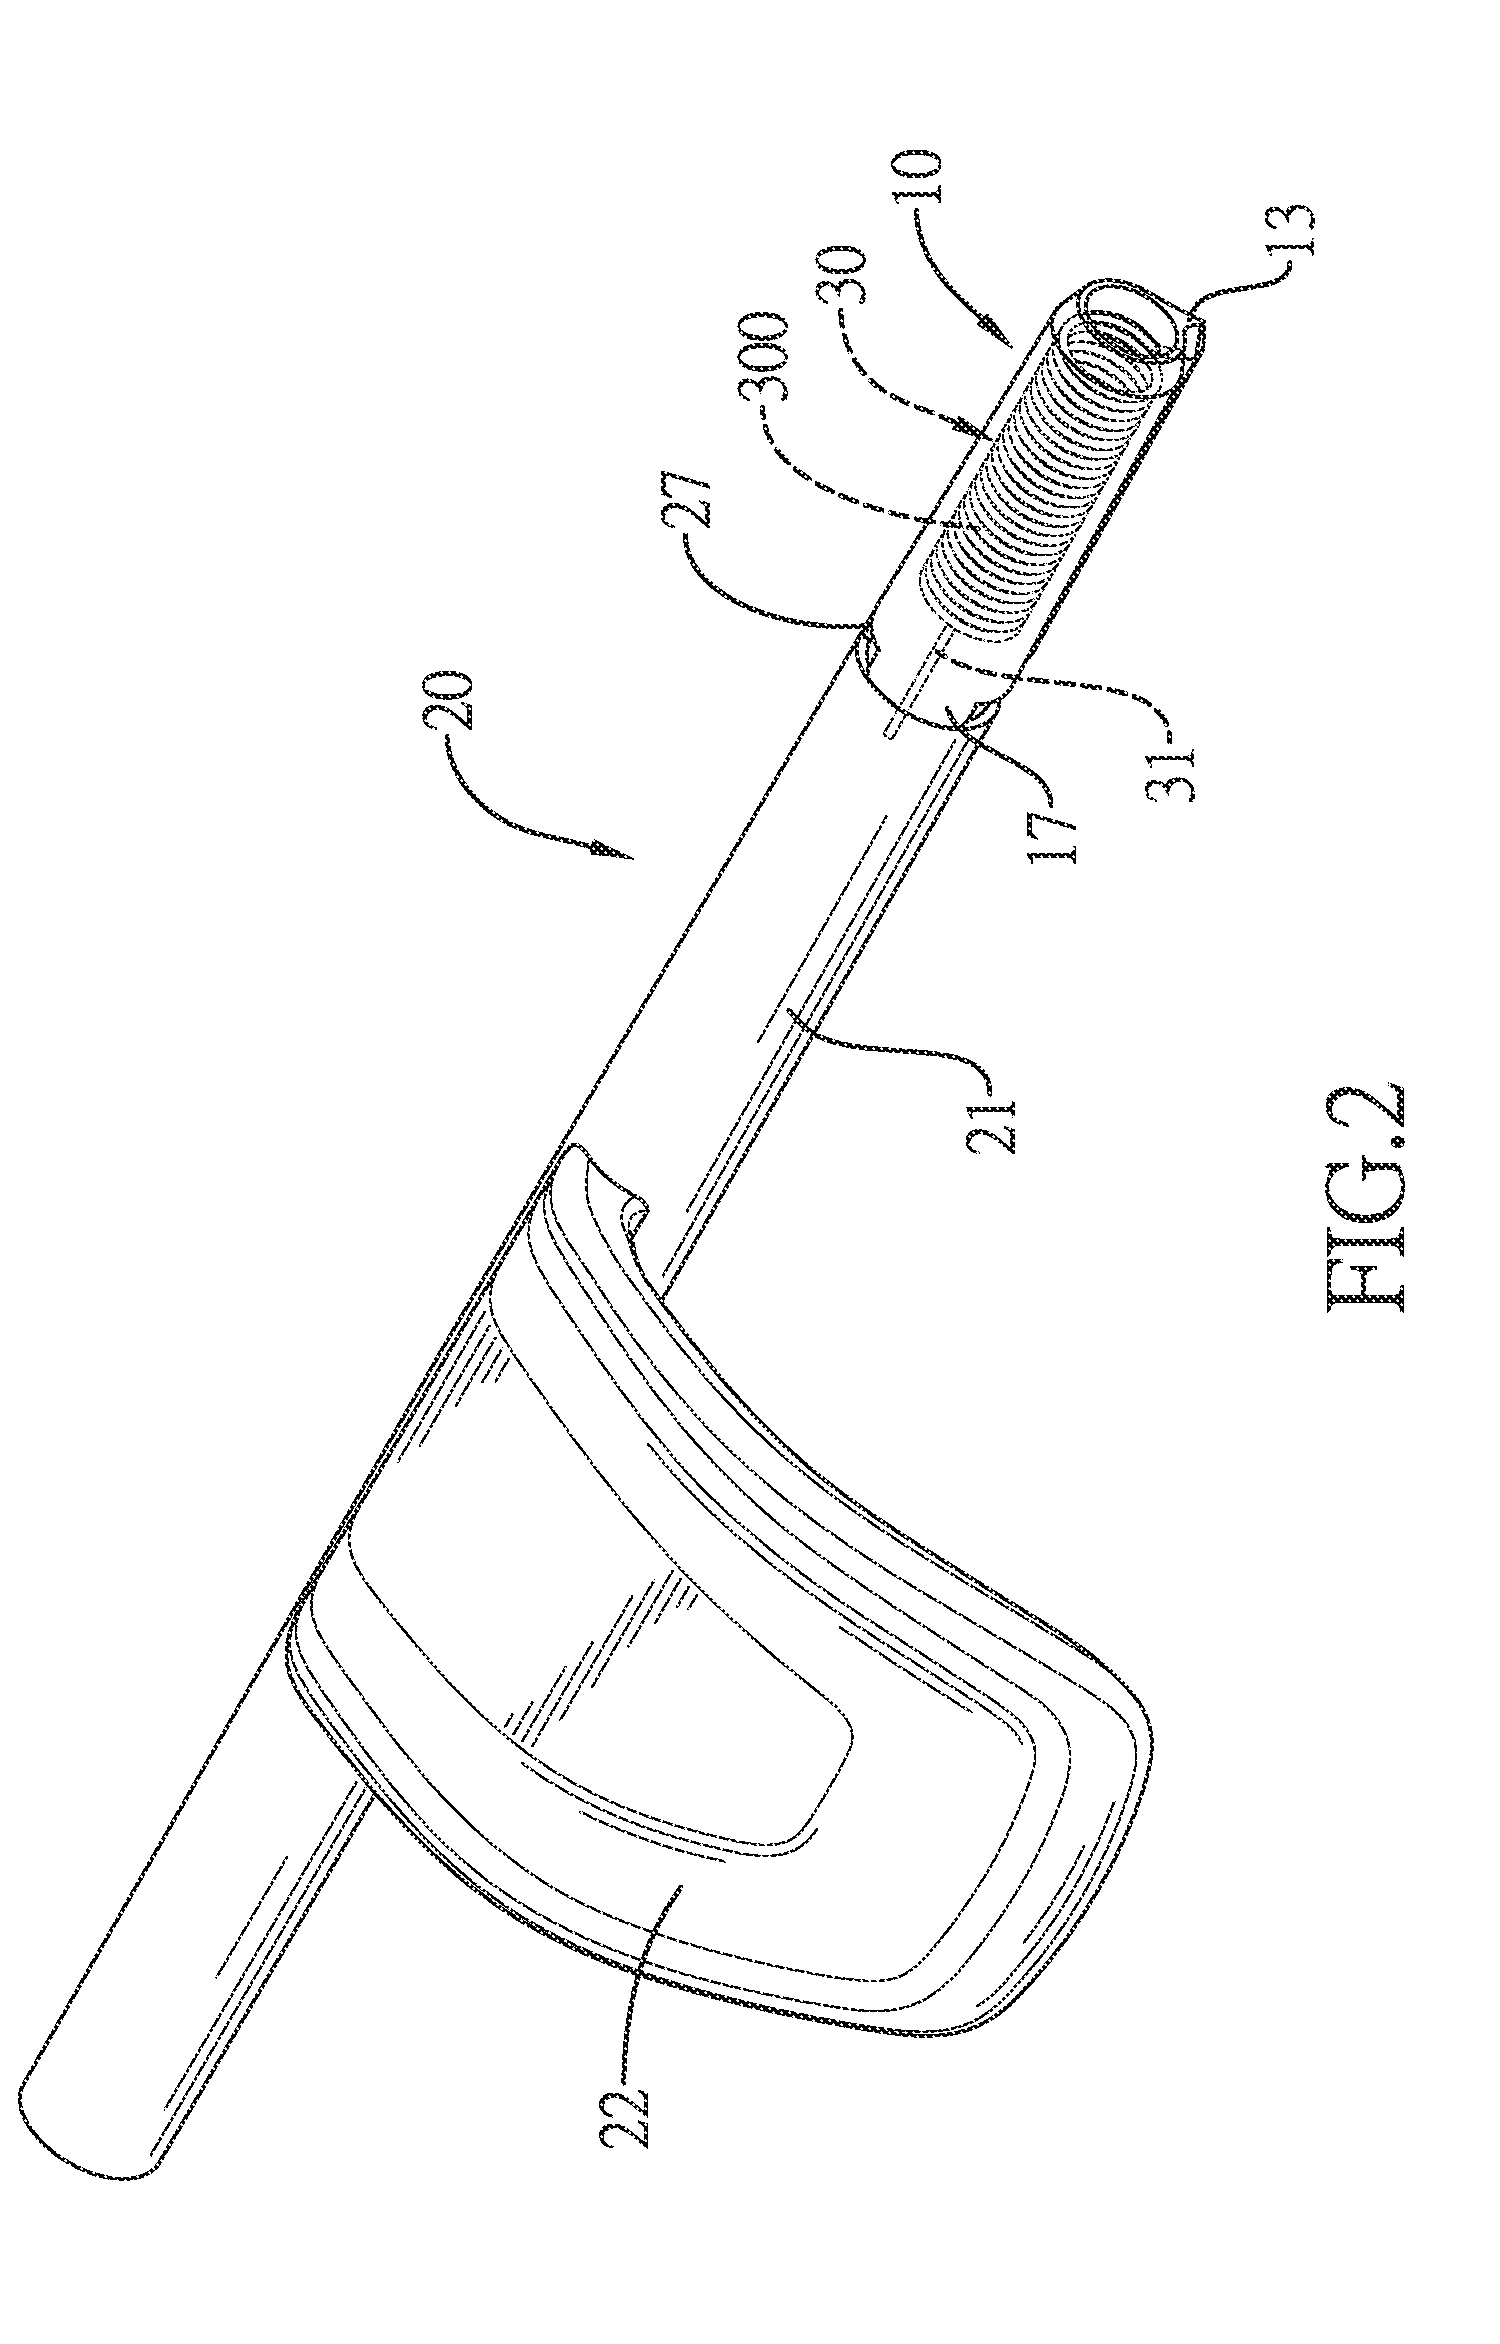 Automatic reset device for curtain pull bar